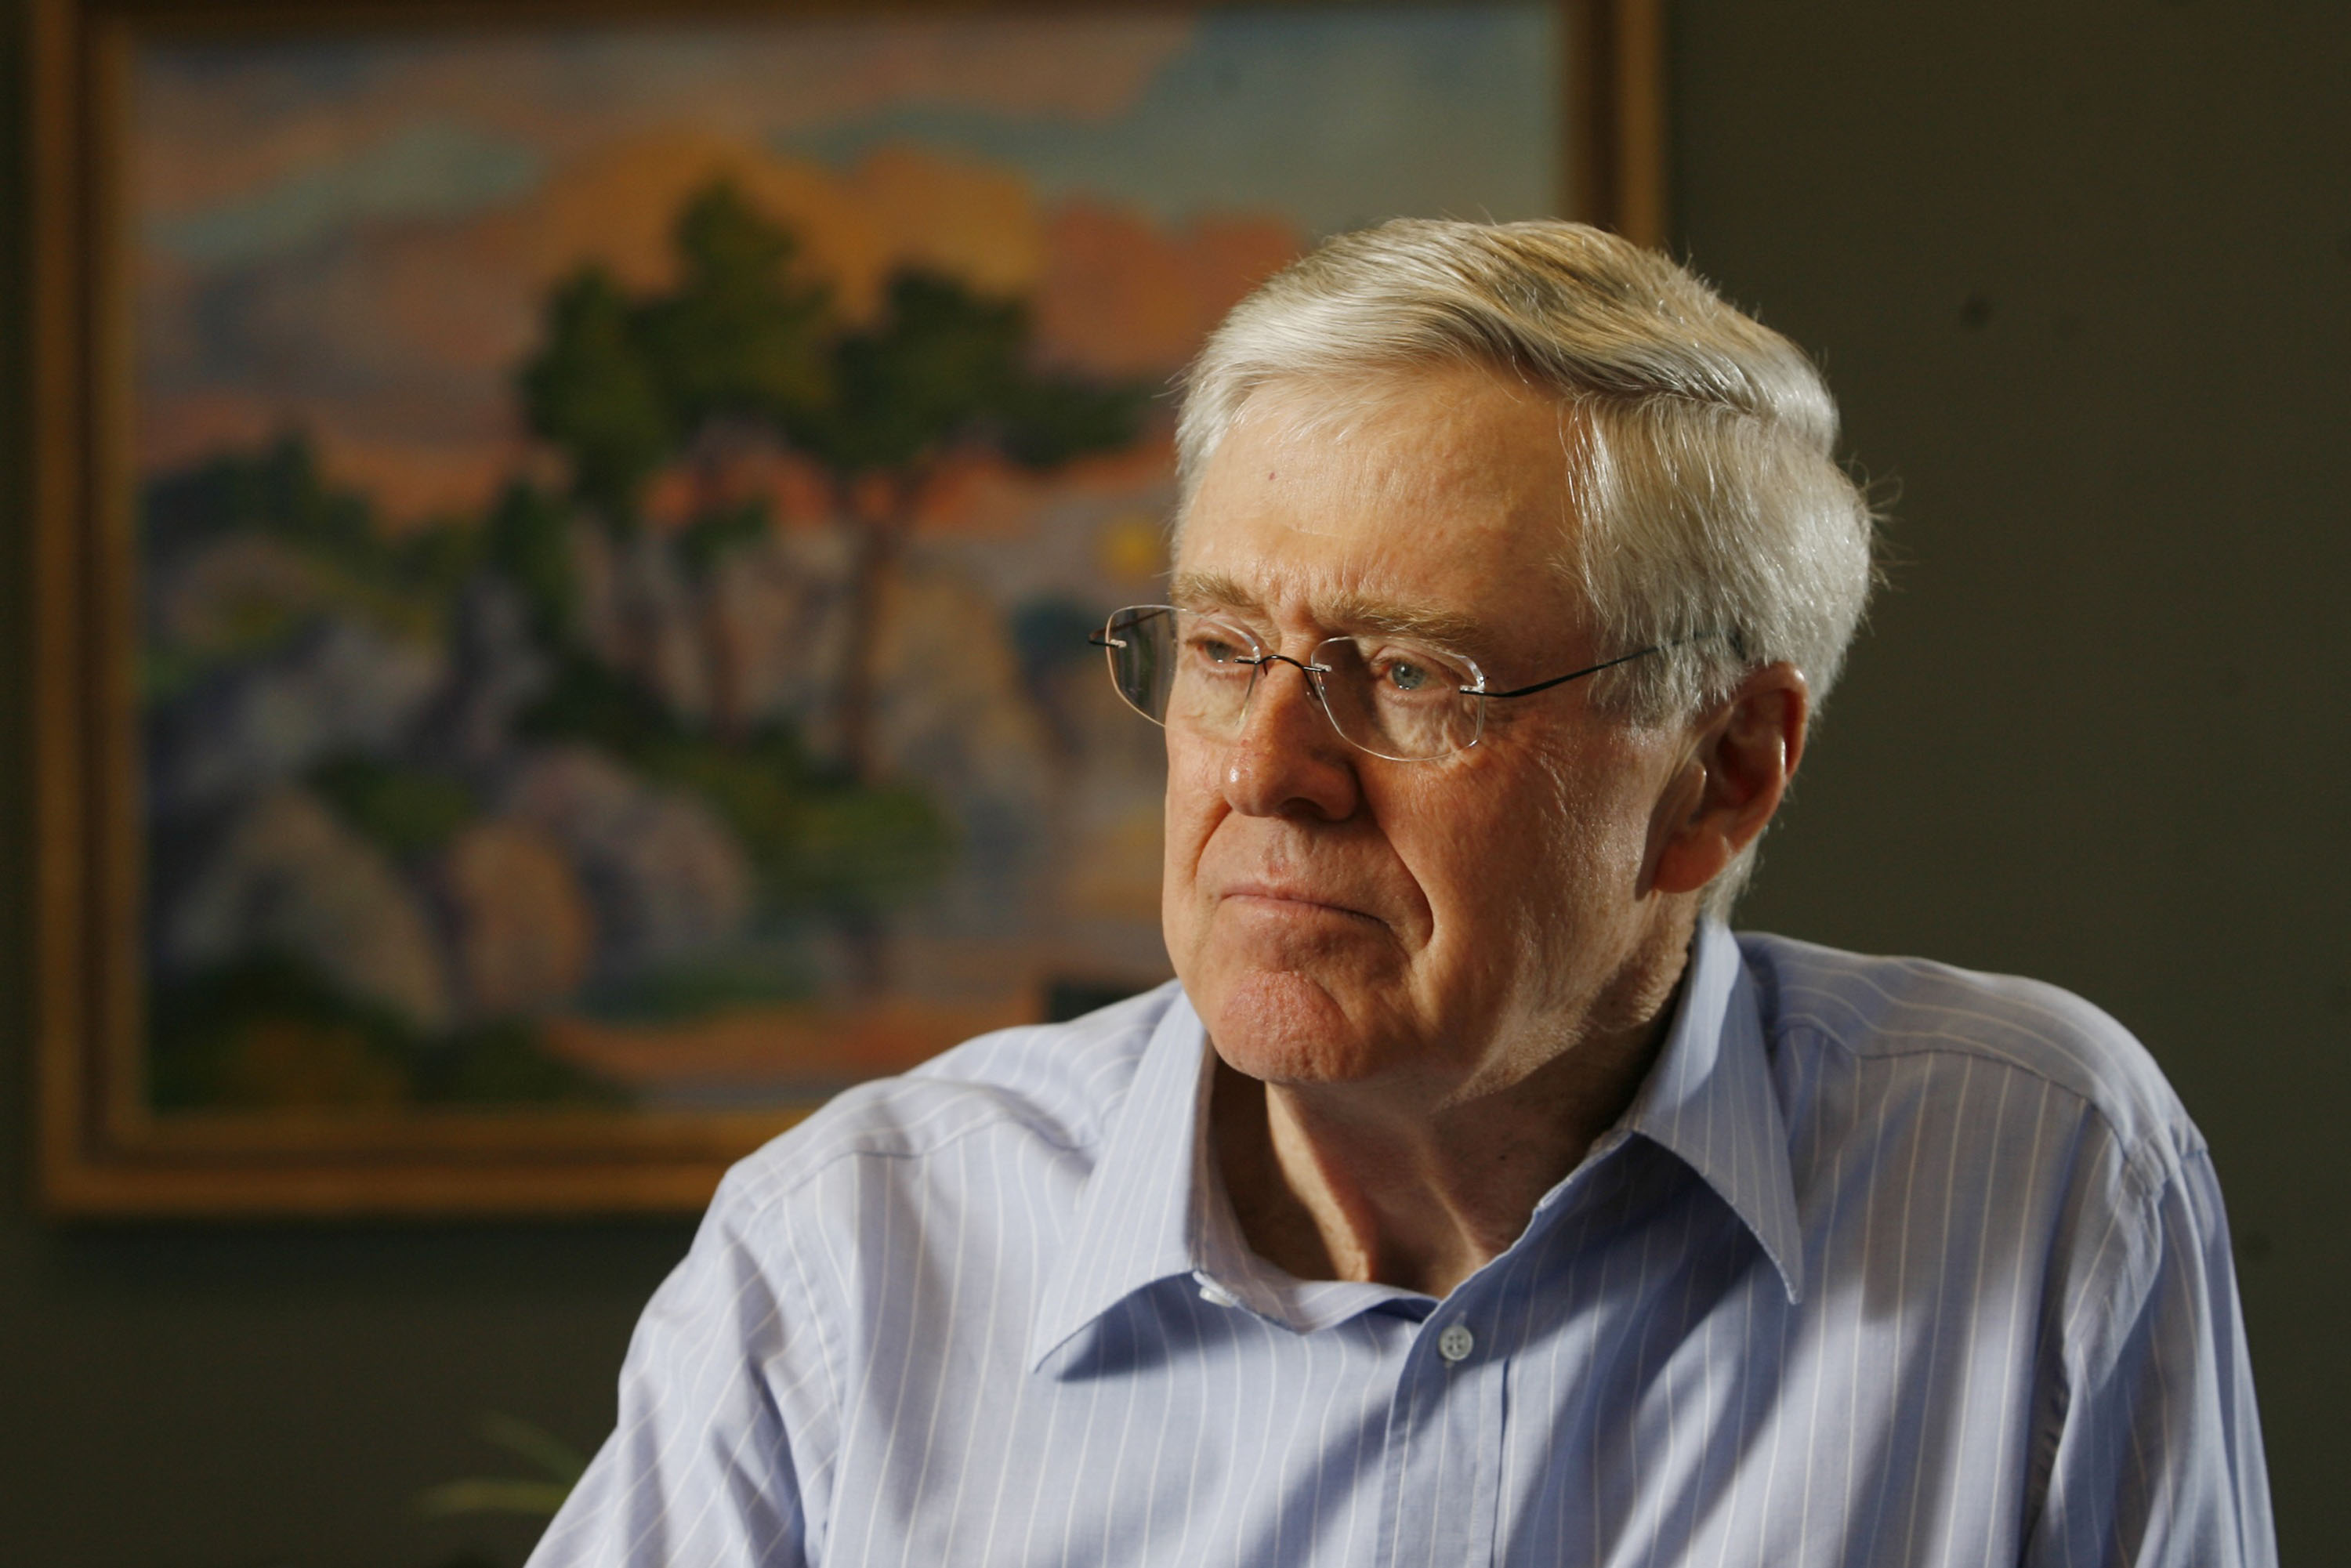 In this February 26, 2007 file photograph, Charles Koch, head of Koch Industries, talks passionately about his new book on Market Based Management. (Wichita Eagle&mdash;MCT via Getty Images)